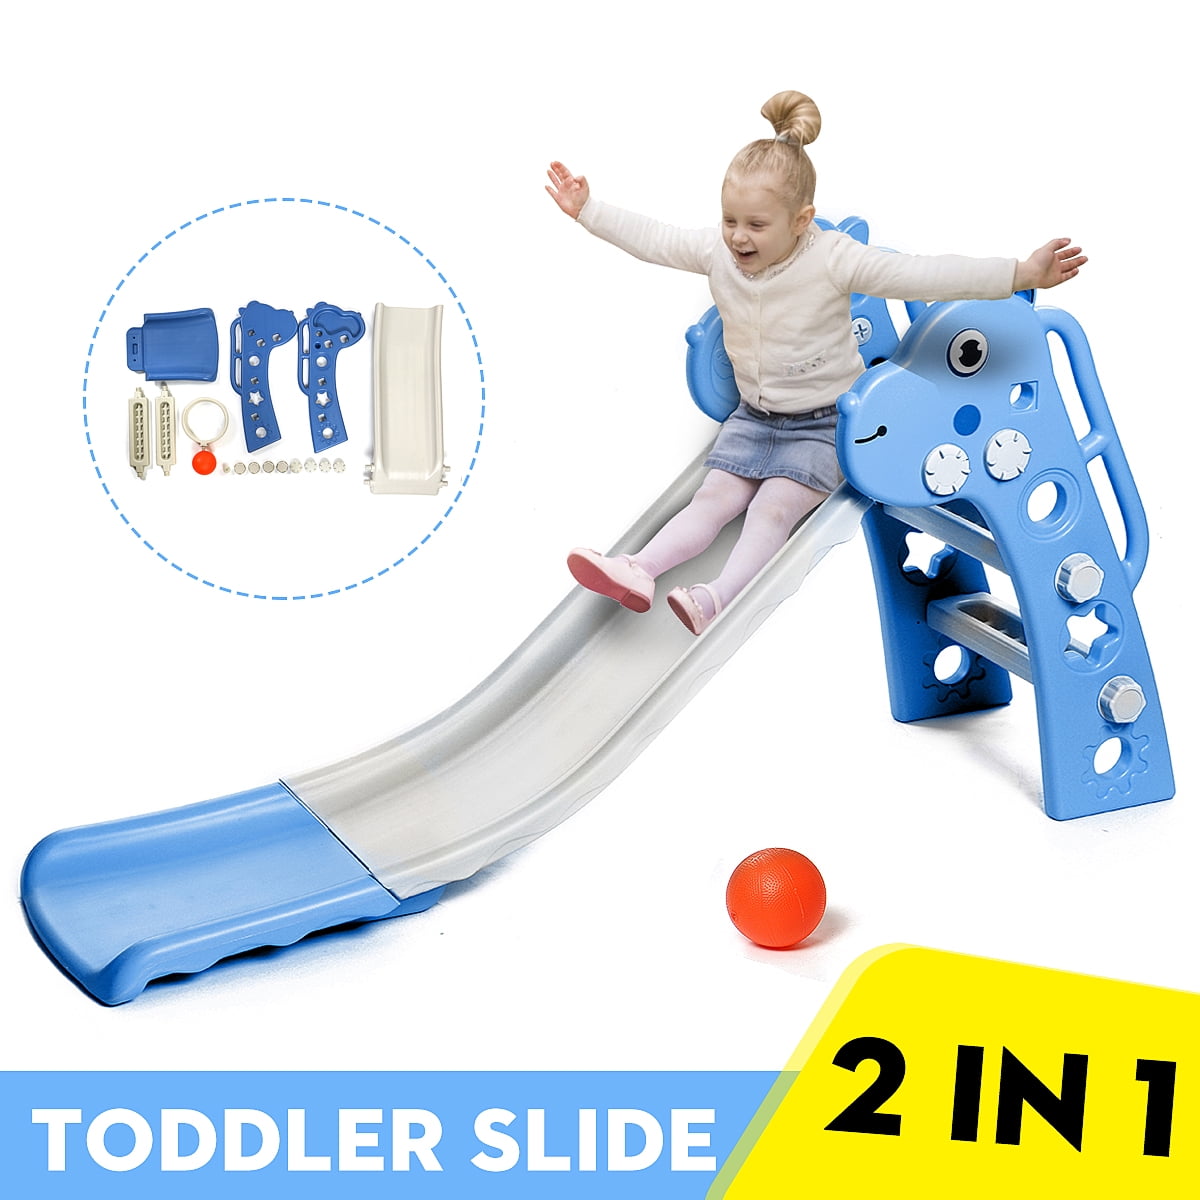 Folding Toddler Baby First Slide Kids Indoor Outdoor Garden Toys Play with Ball 